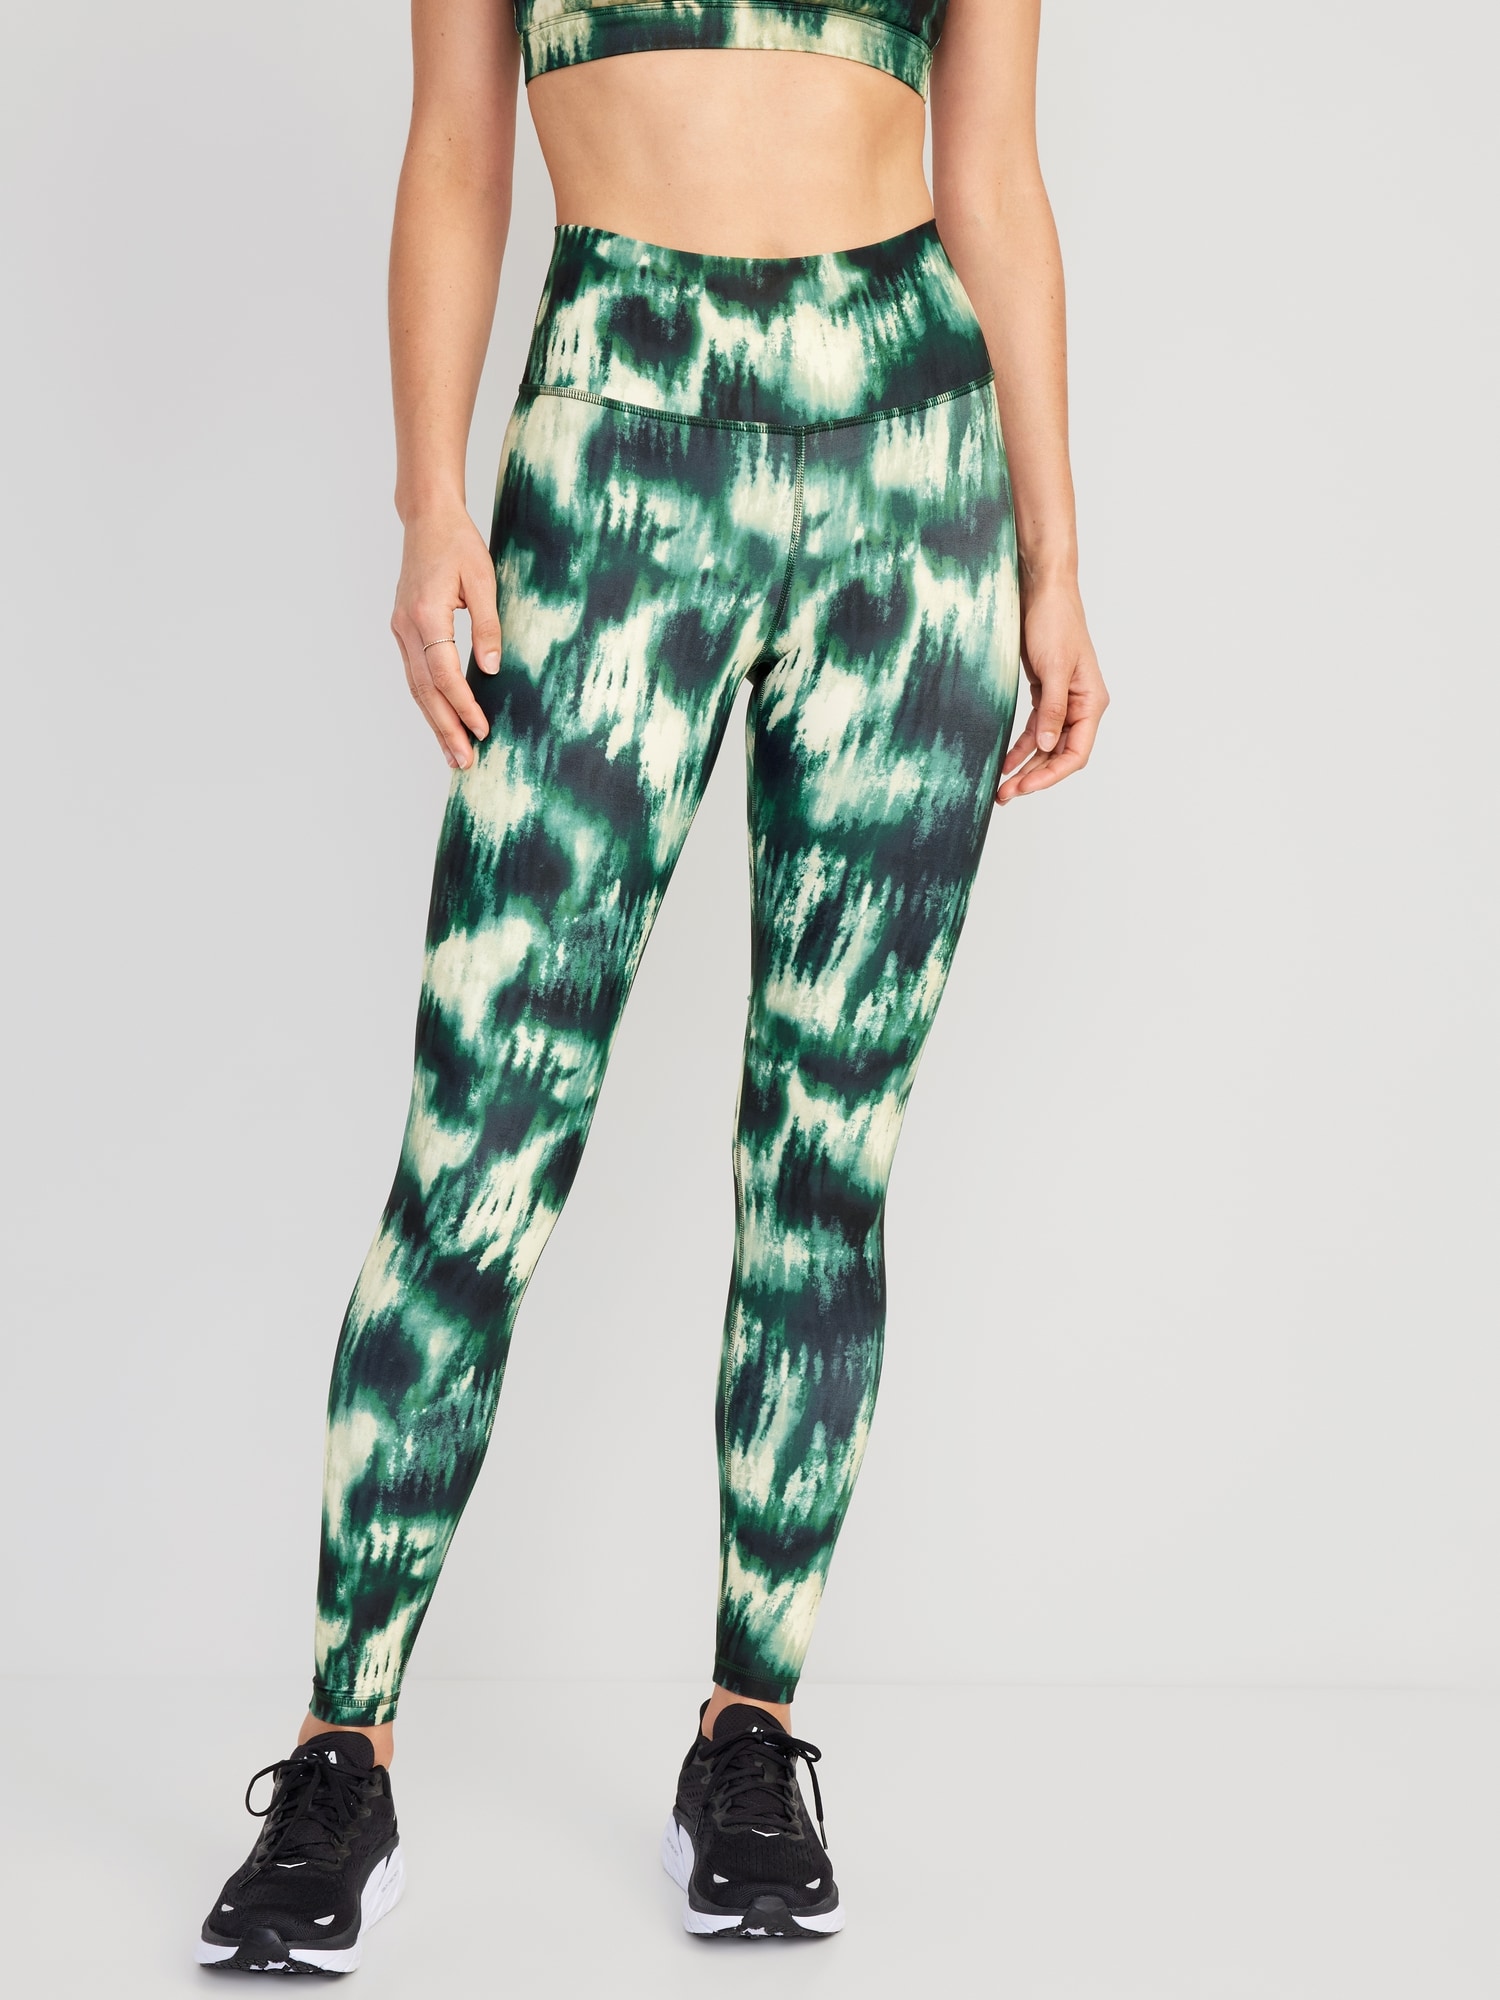 Old Navy Tropical Green Leggings Size XS (Petite) - 26% off